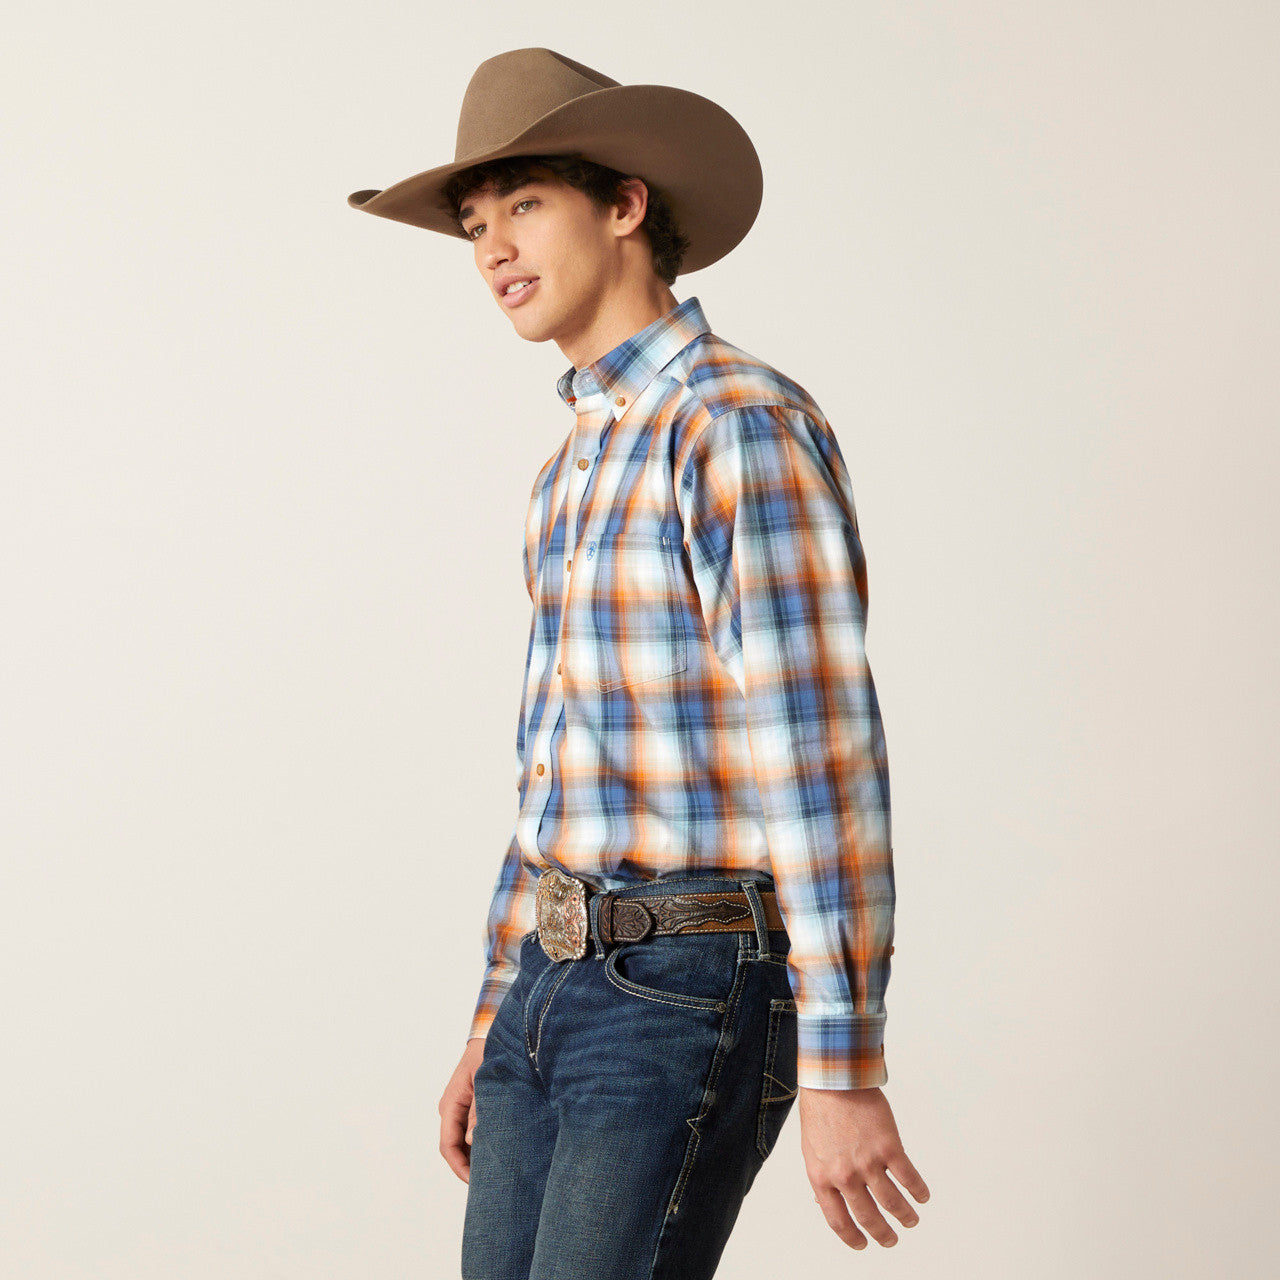 ARIAT Pro Series Greer Classic Fit Button Down Shirt